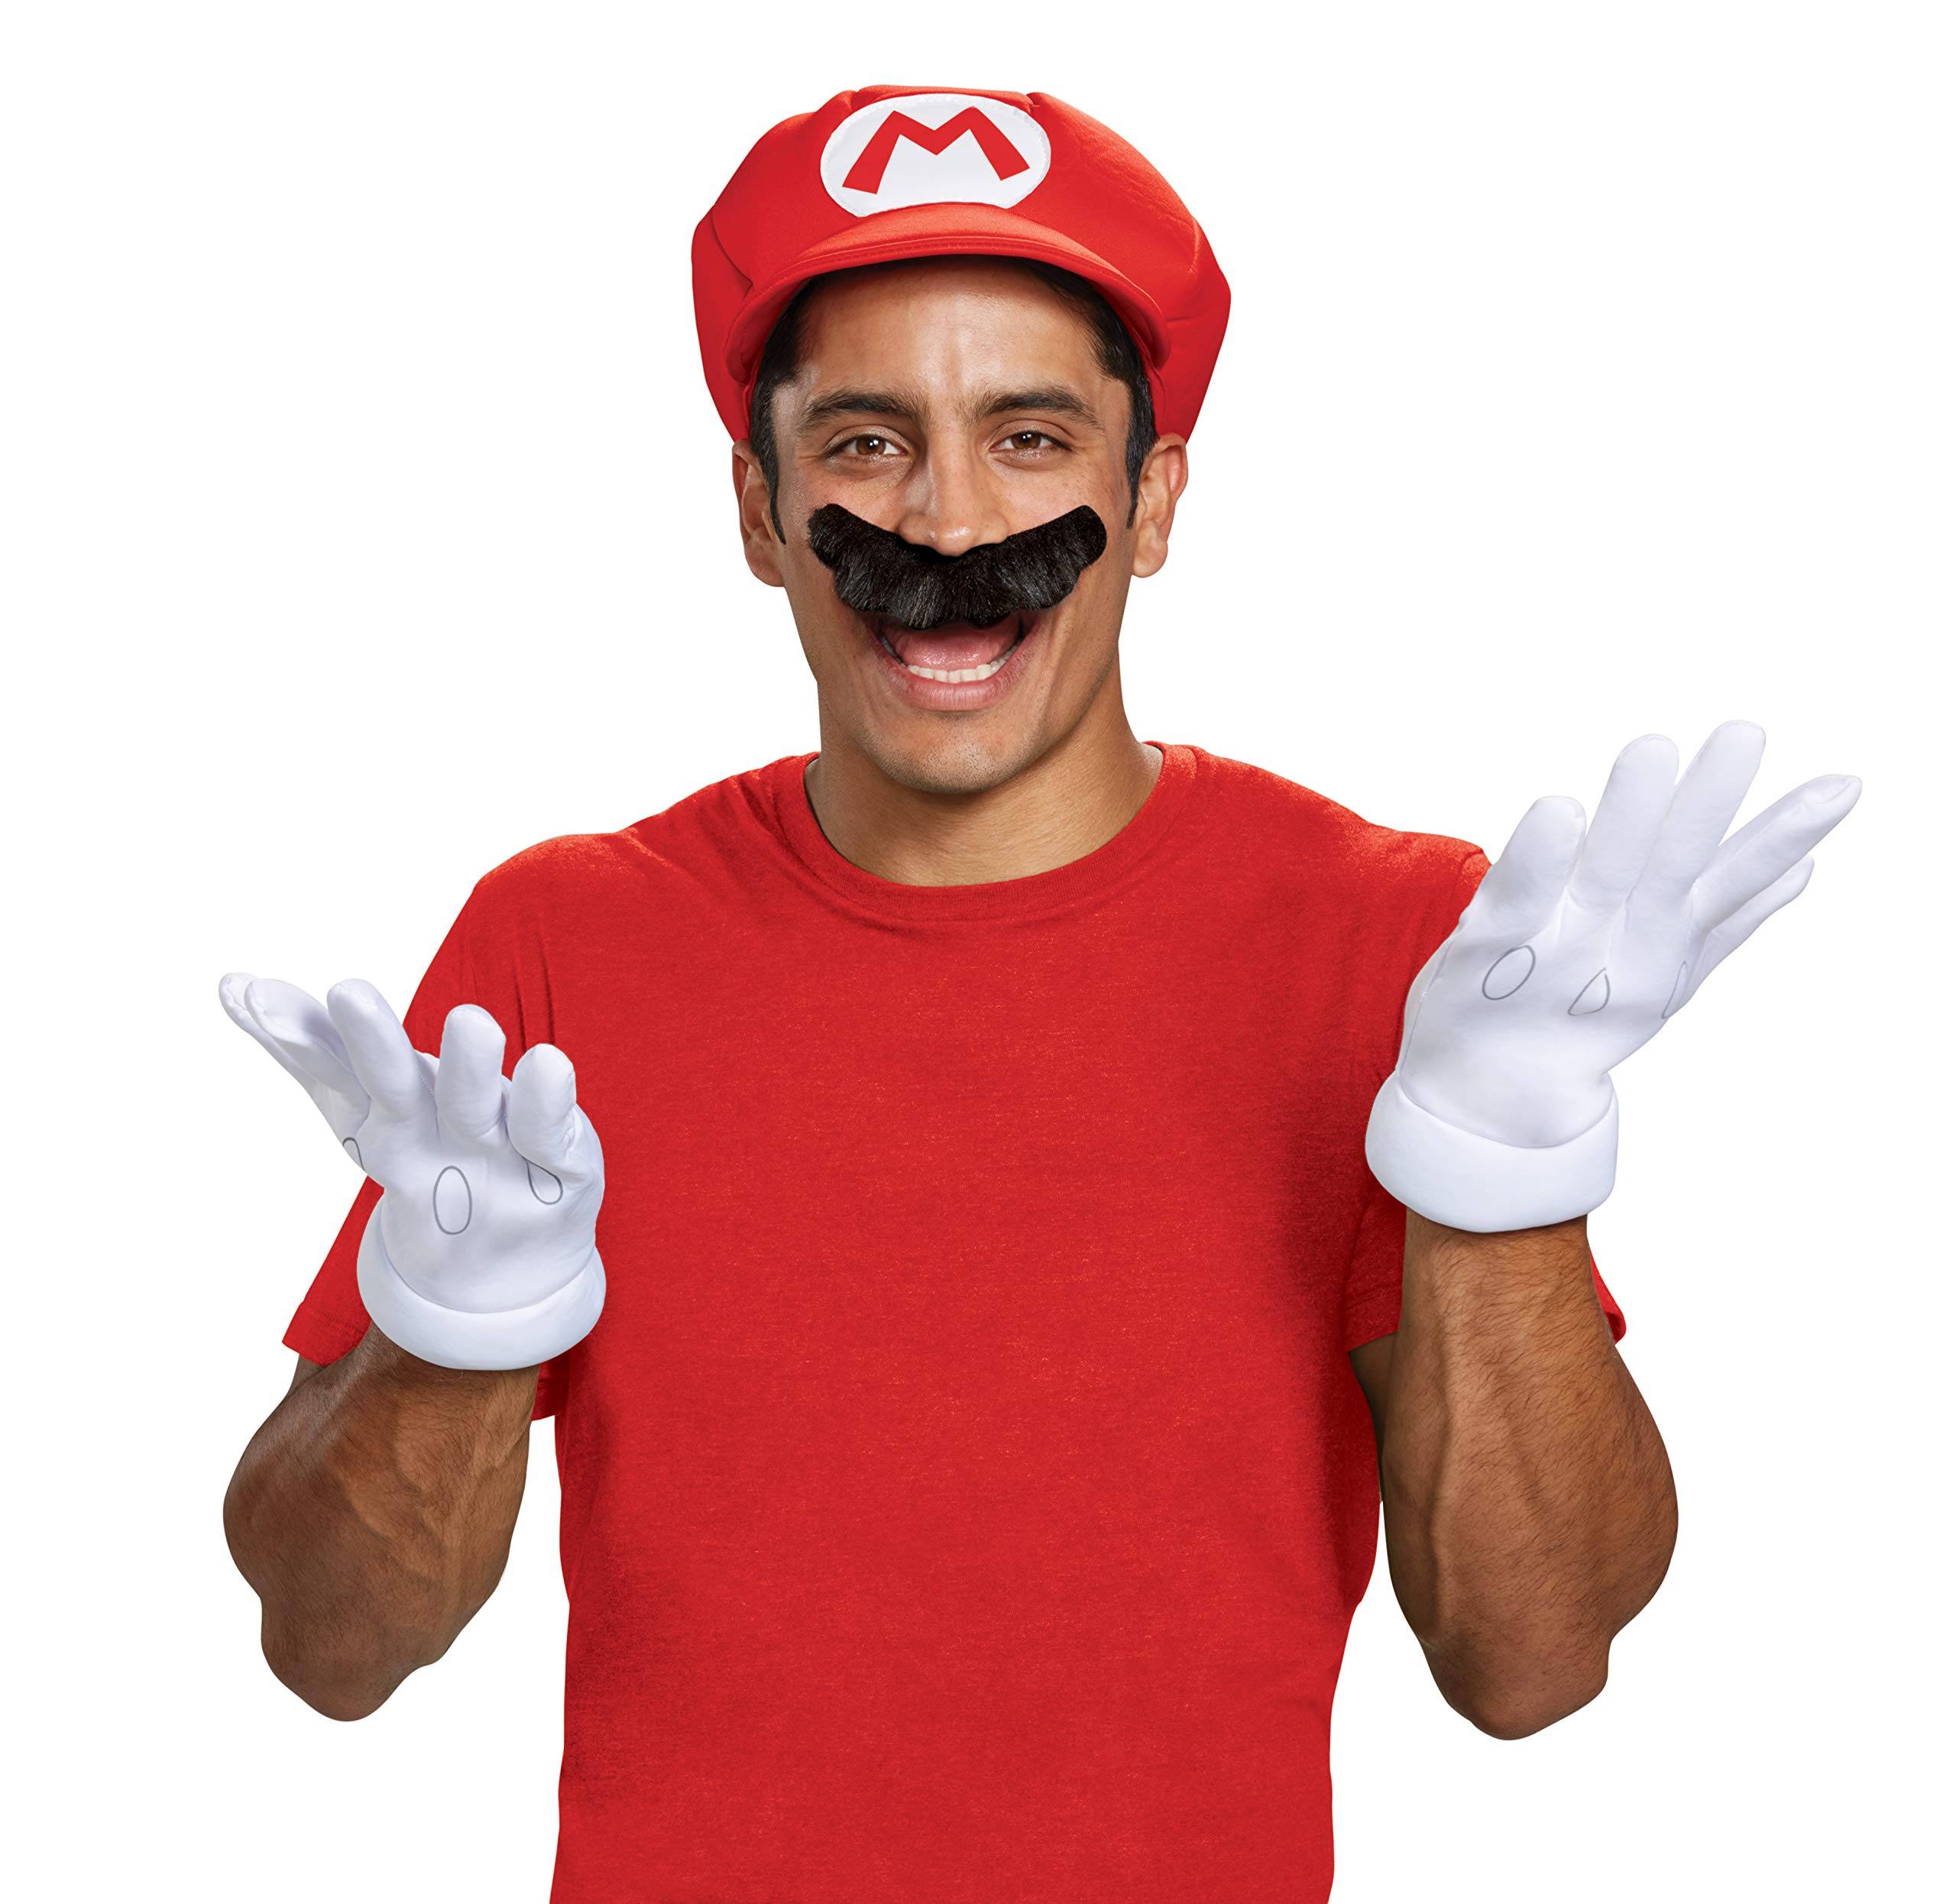 Nintendo Super Mario Bros. Adult Mario Costume Accessory Kit (Hat, Gloves, Moustache) $10.50 + Free Shipping w/Red Card or on $35+